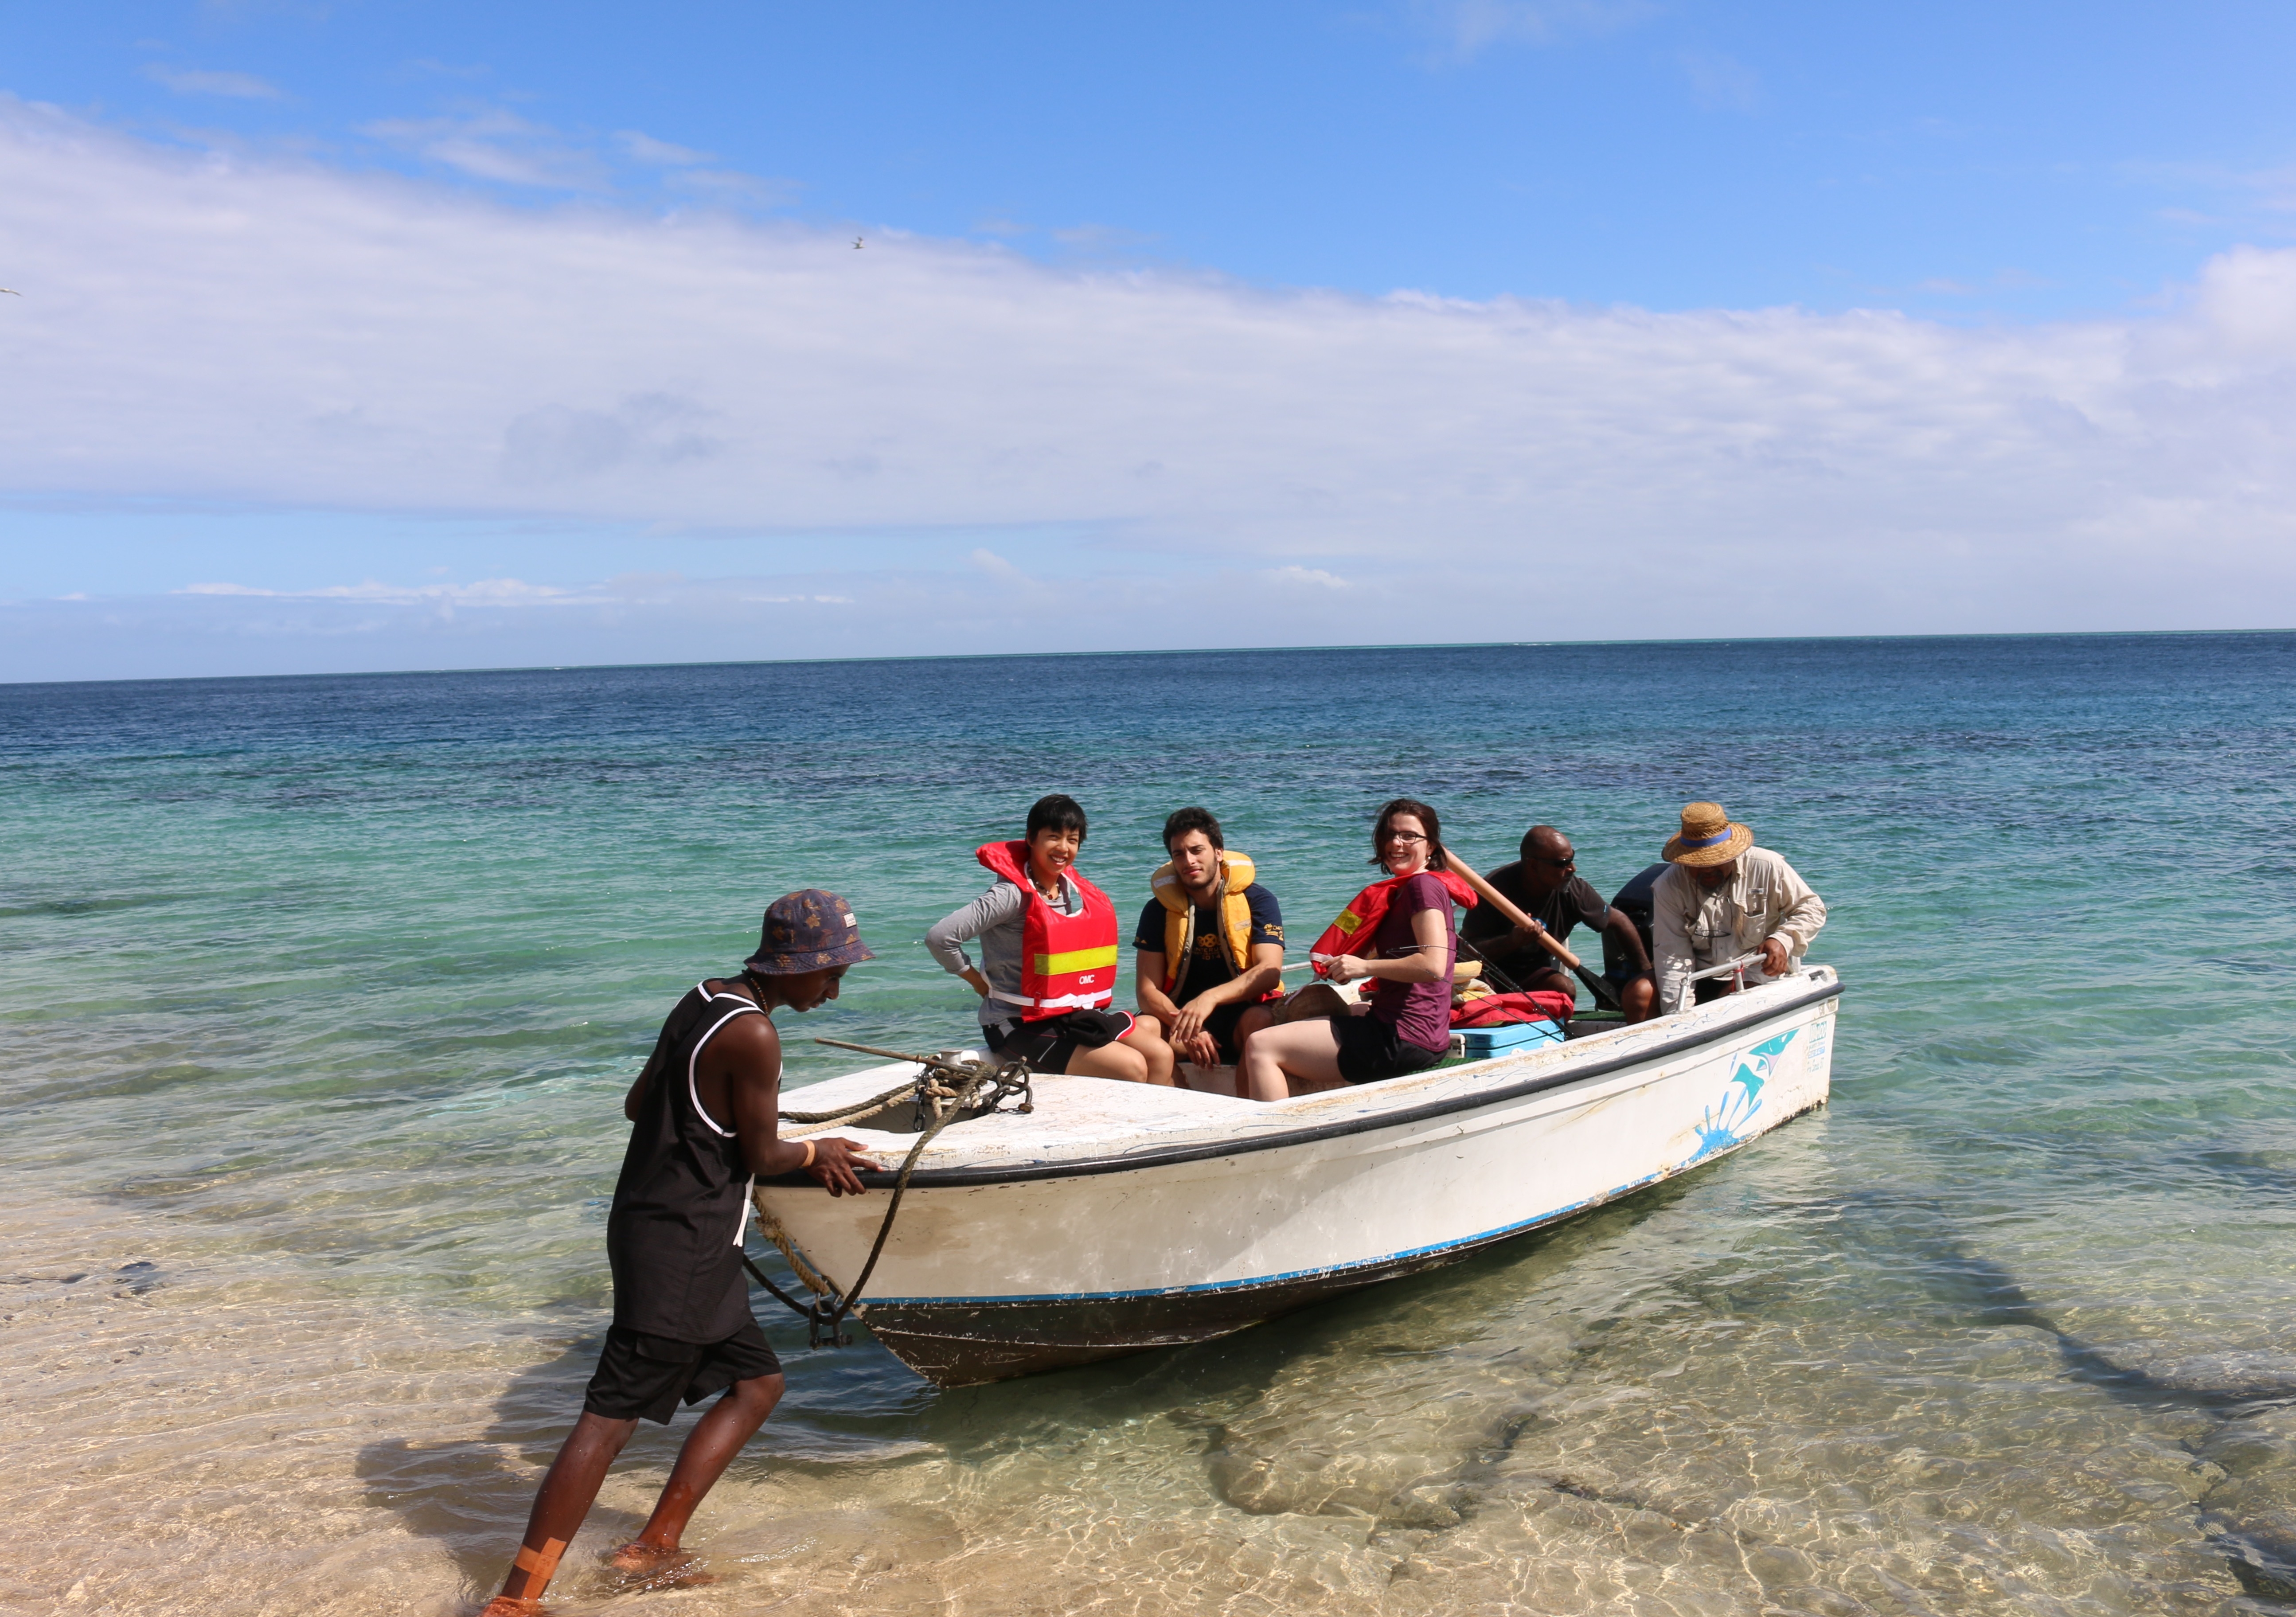 The students on Mer Island. Photo: UNSW